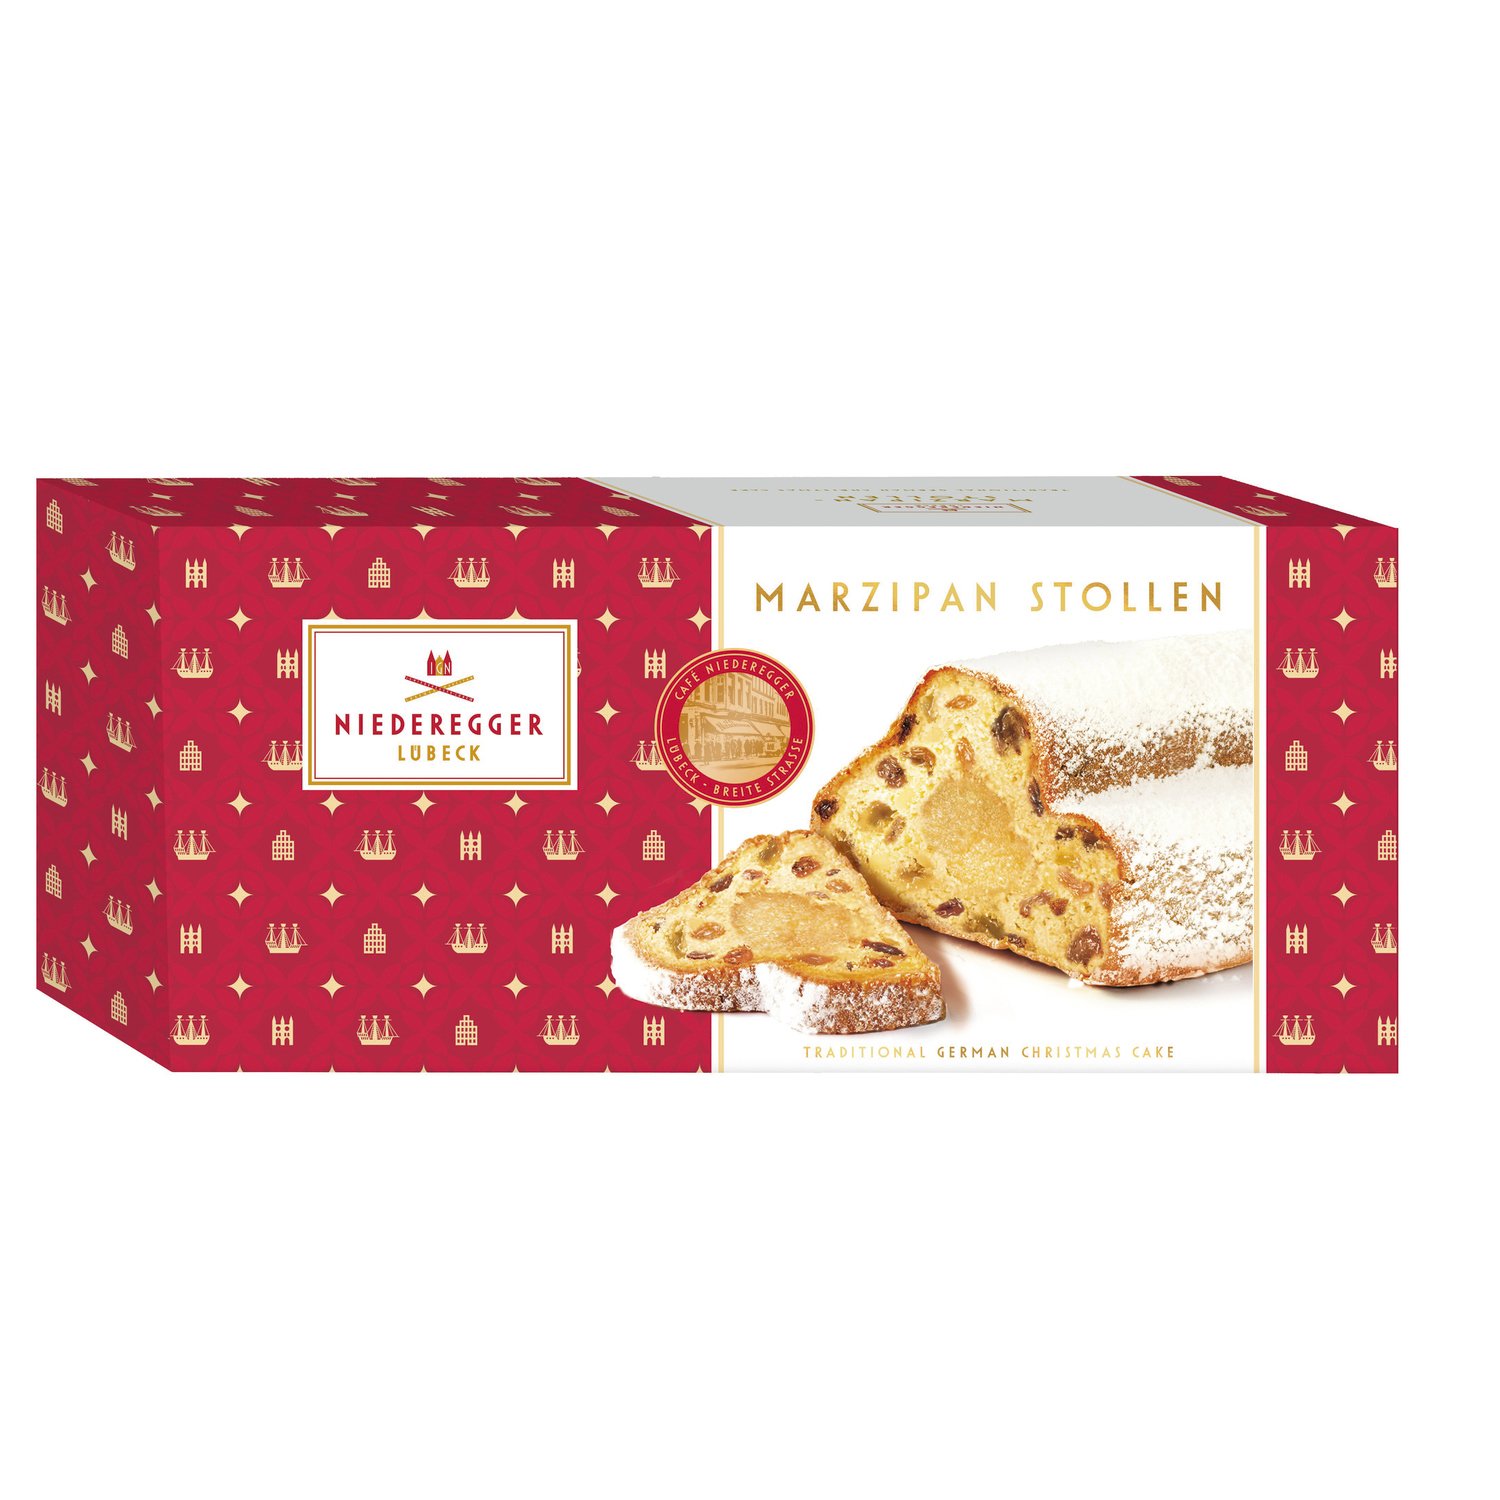 Marzipan stollen - fruit loaf with marzipan - VAT FREE - 6x750g